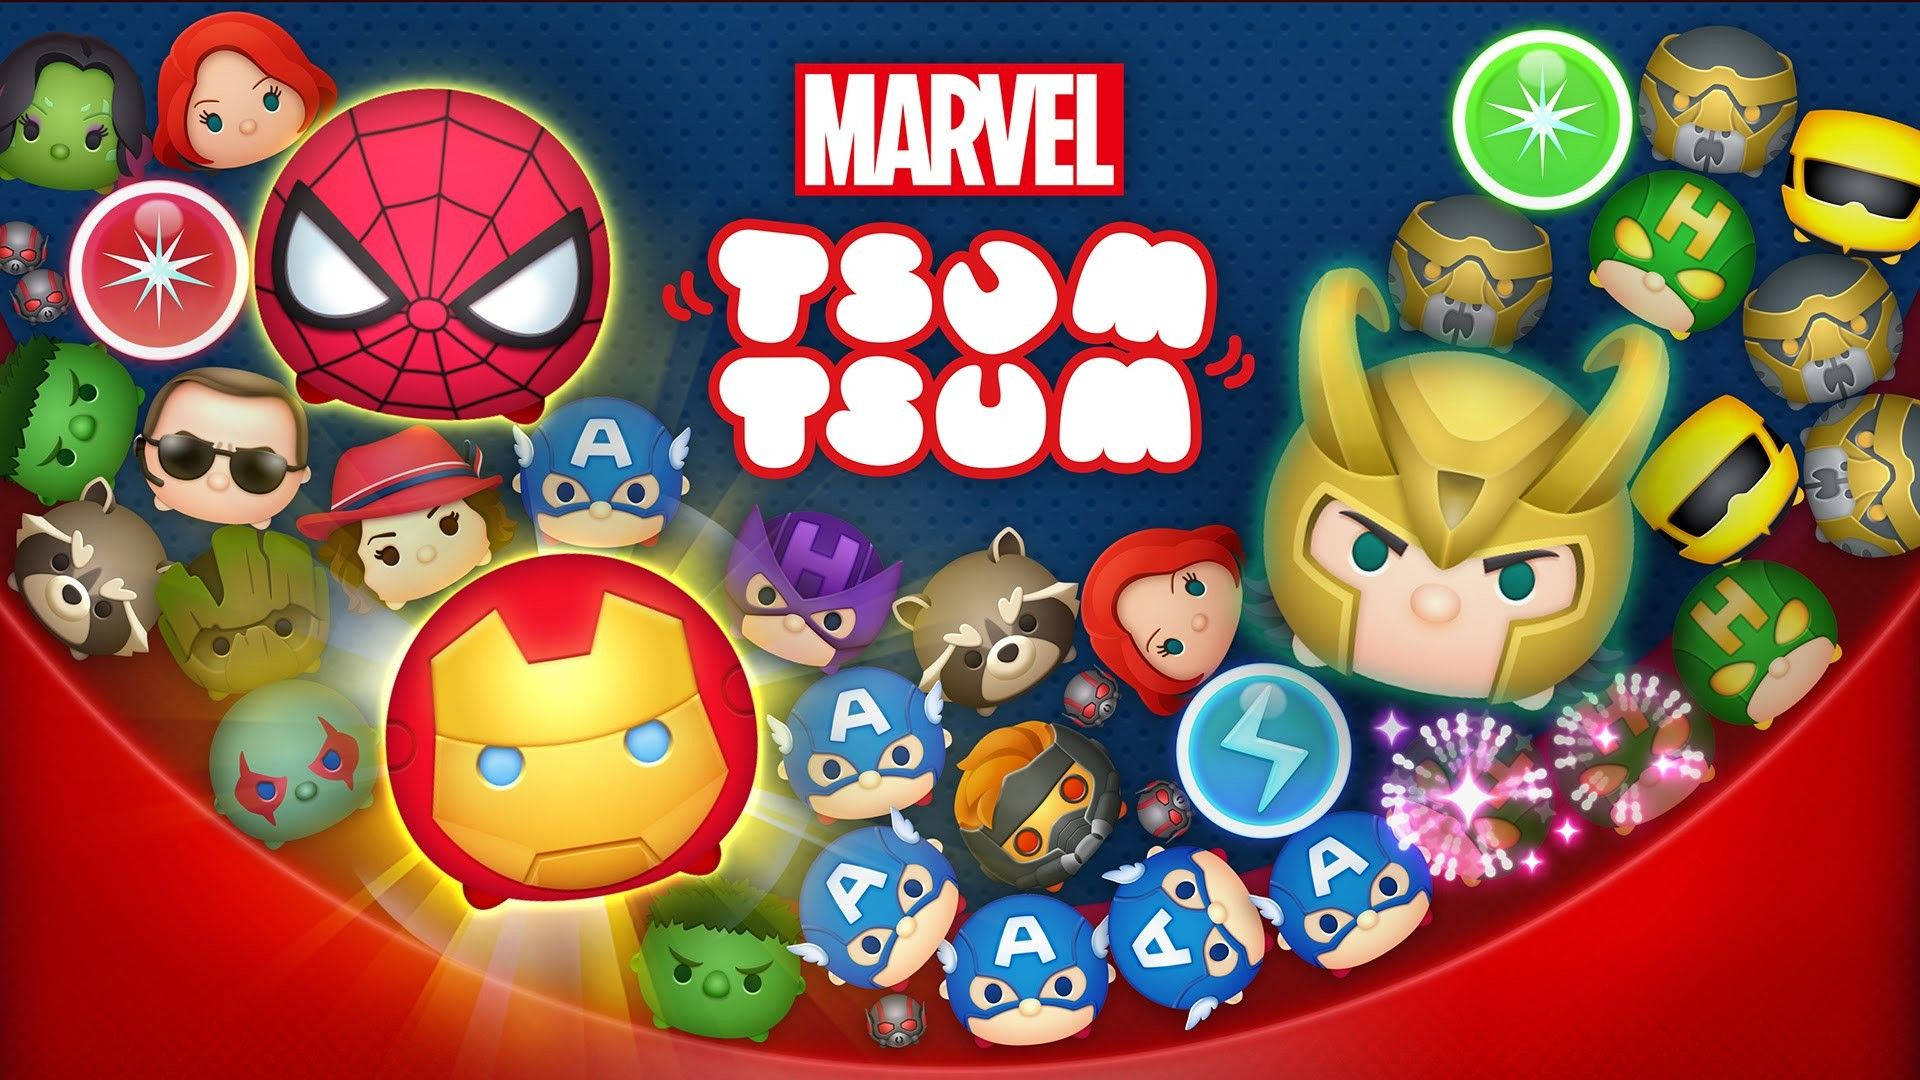 "Cuteness abounds with these Marvel heroes" Wallpaper